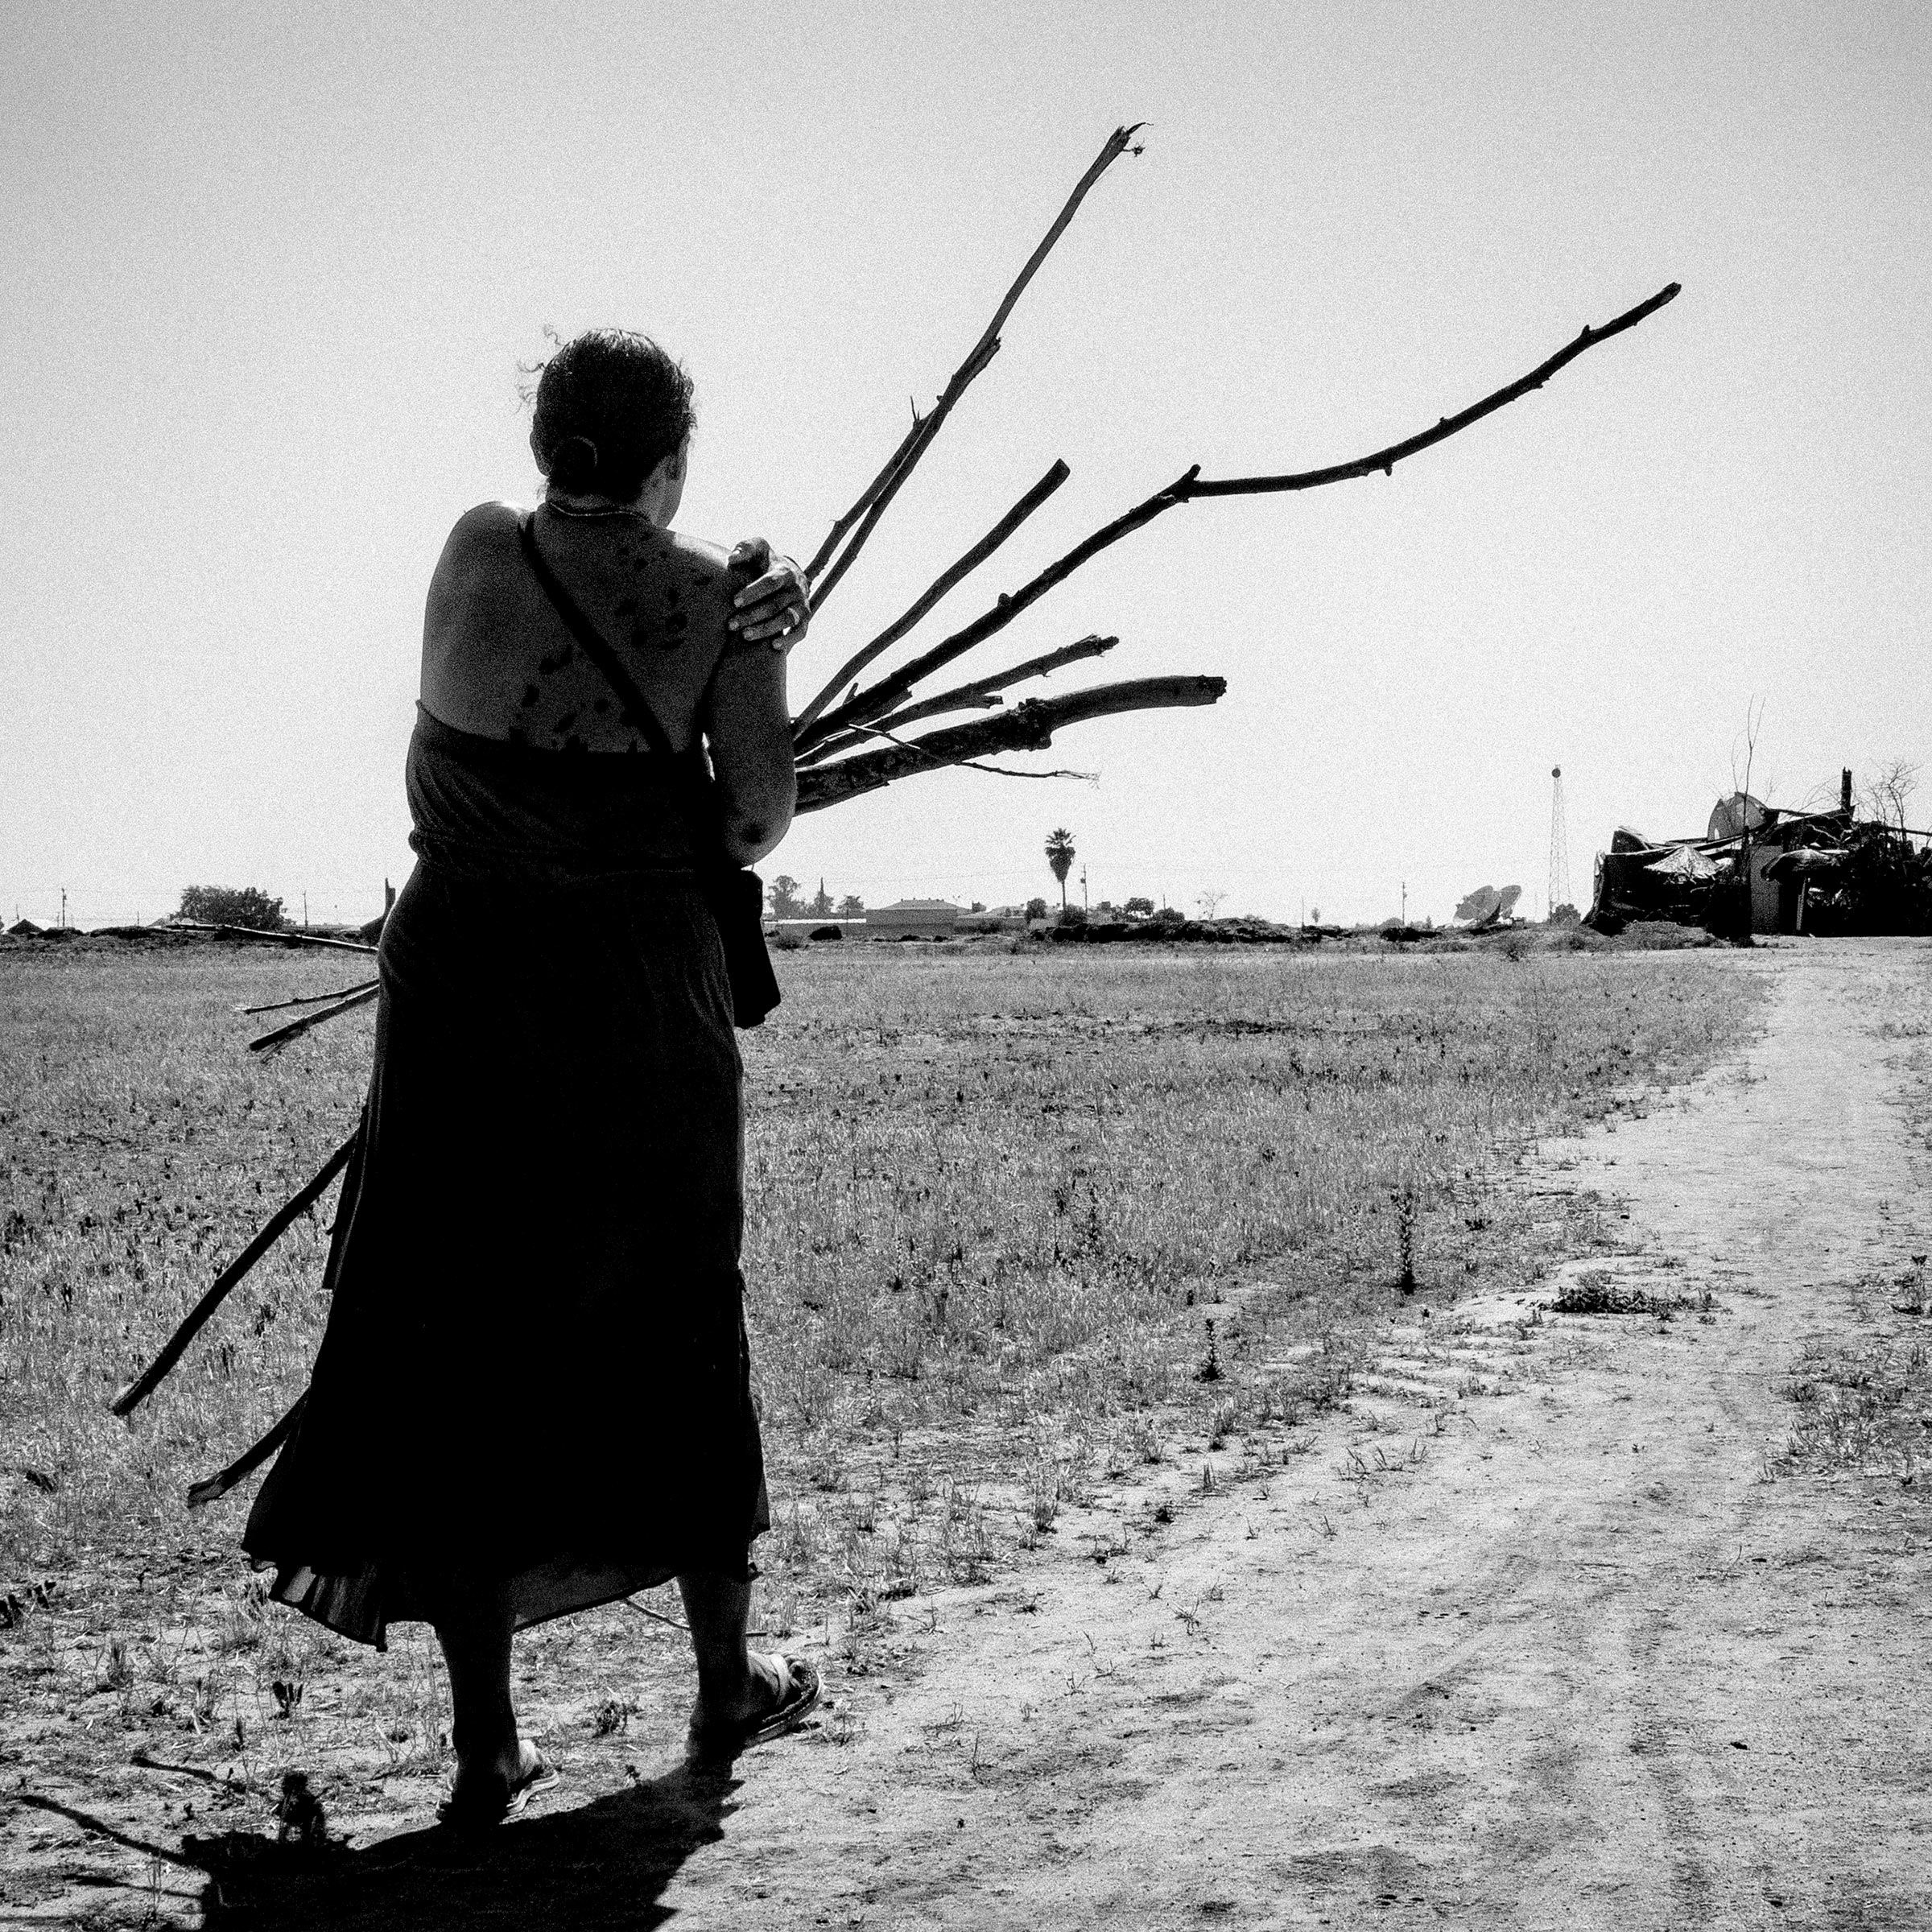 Woman carrying sticks at a homeless camp. Fresno, Calif. 2014.